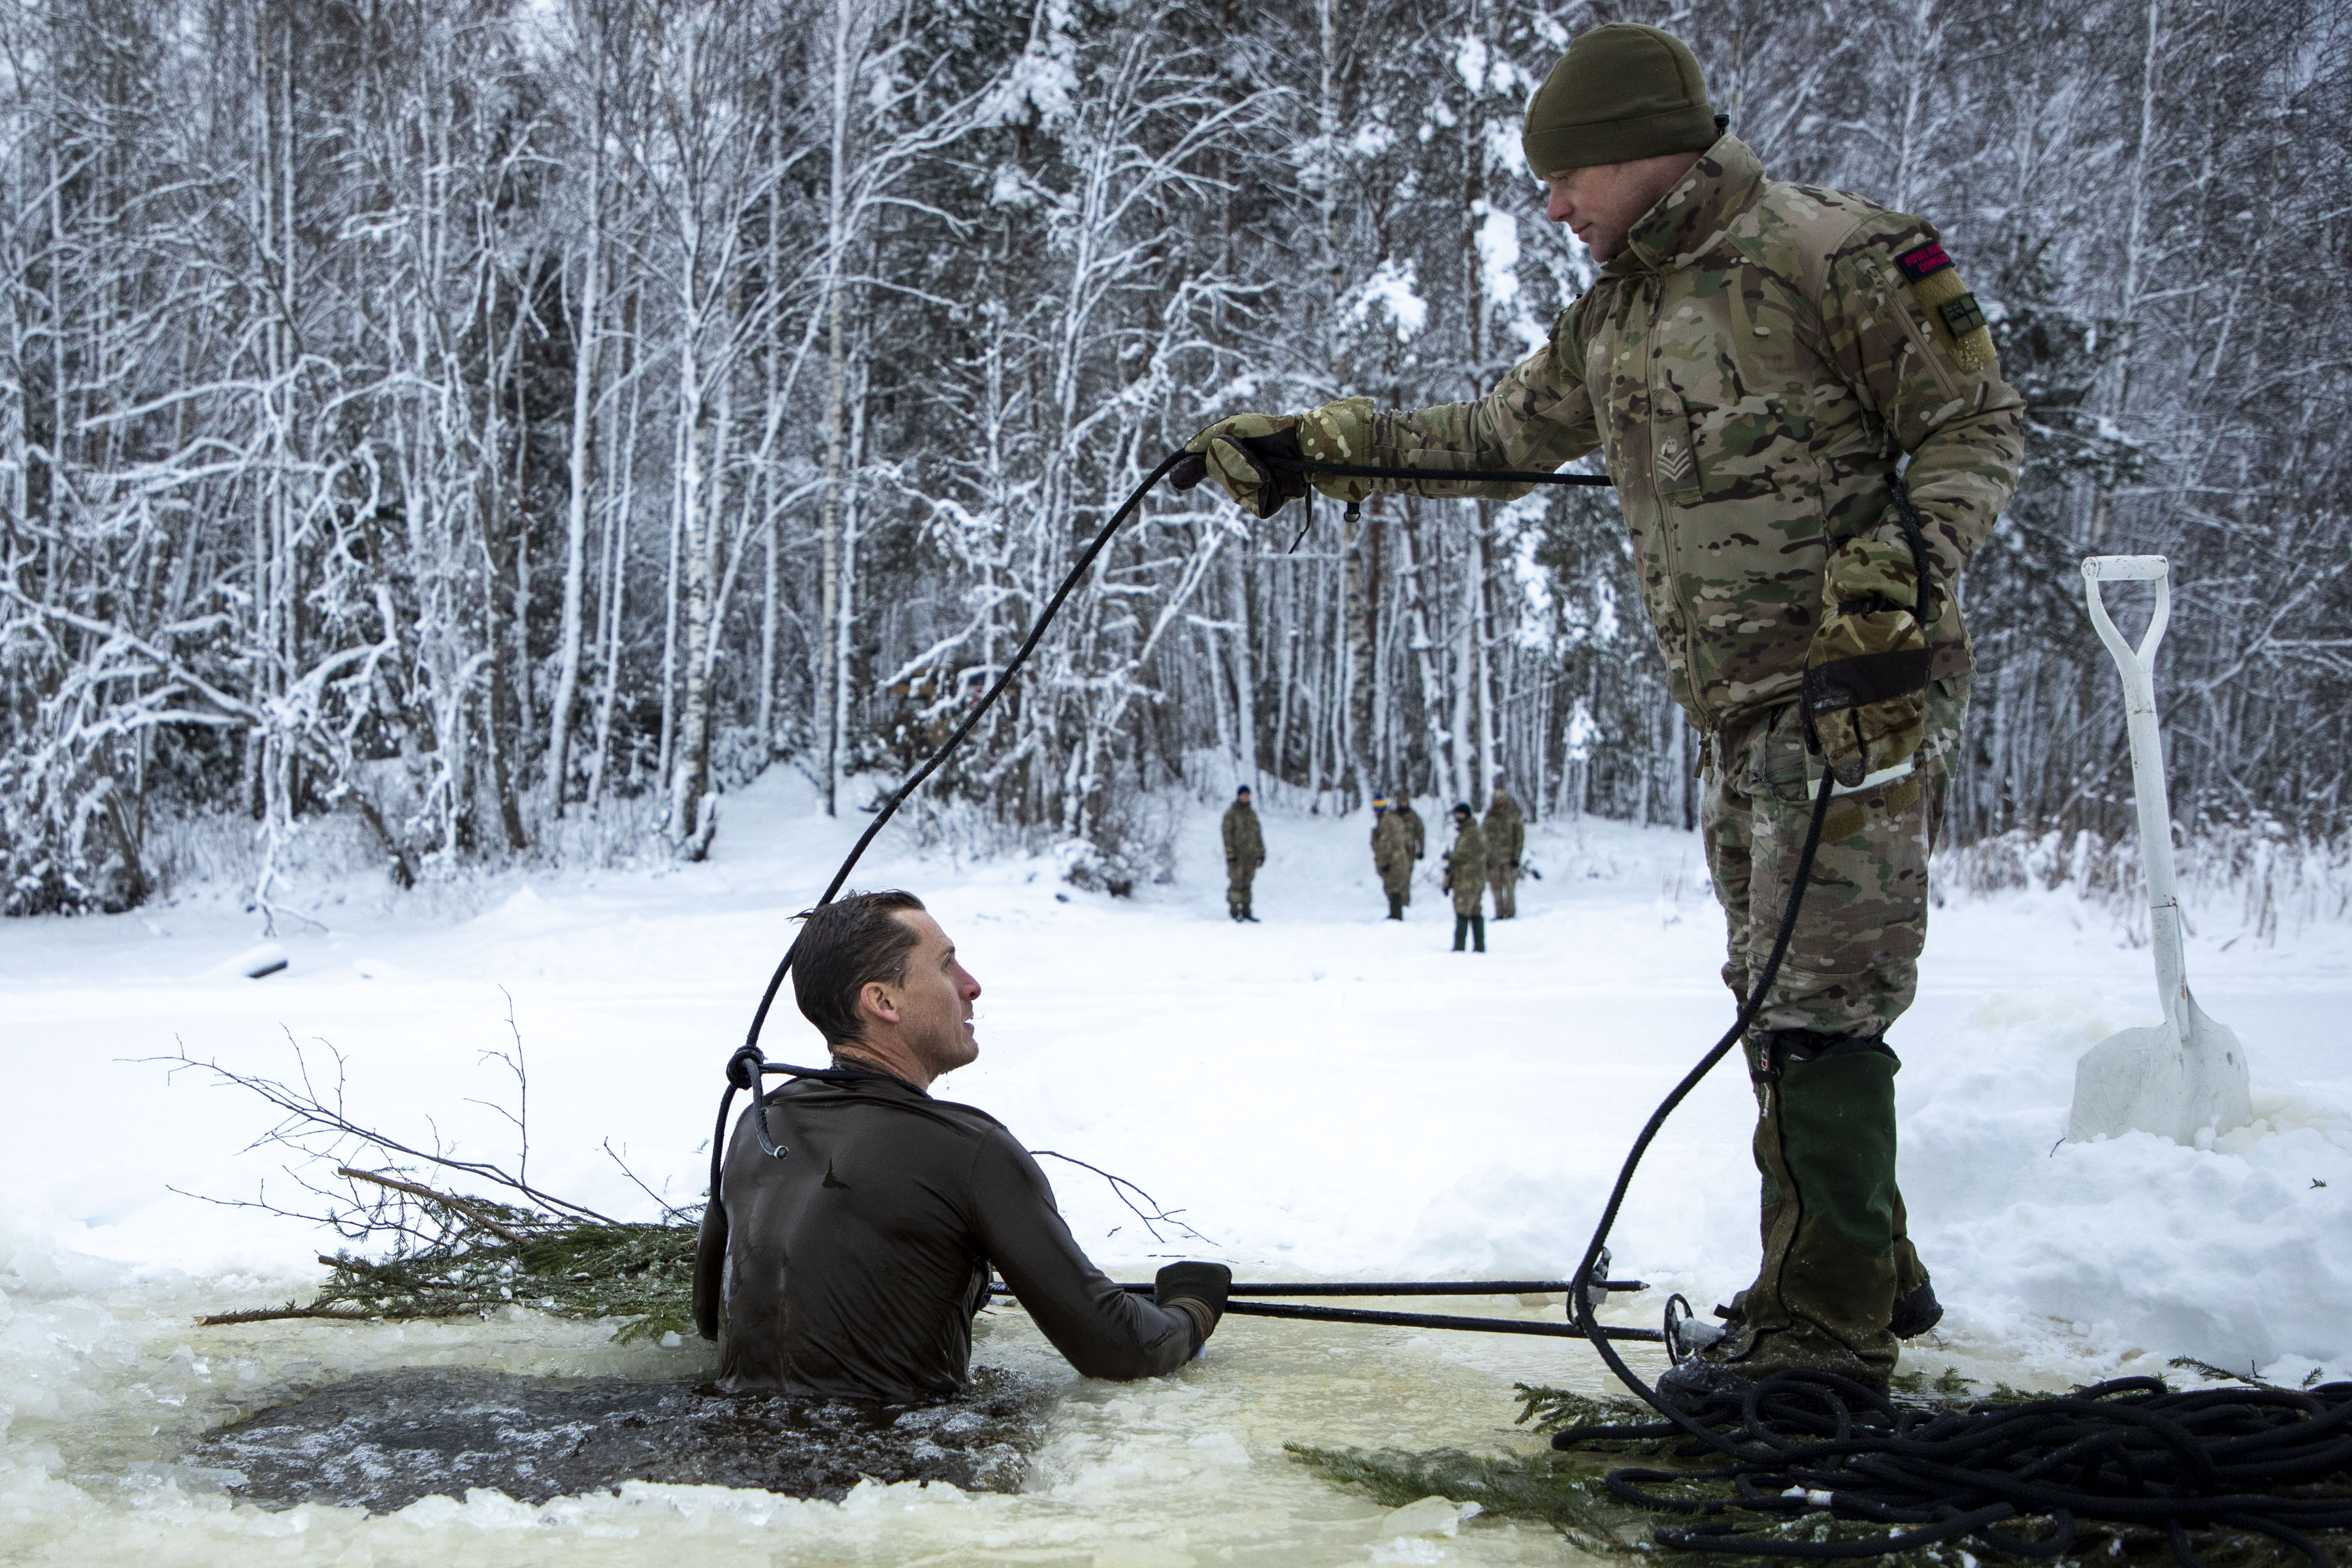 Image shows RAF aviator using rope to pull another out of a frozen lake while on exercise.